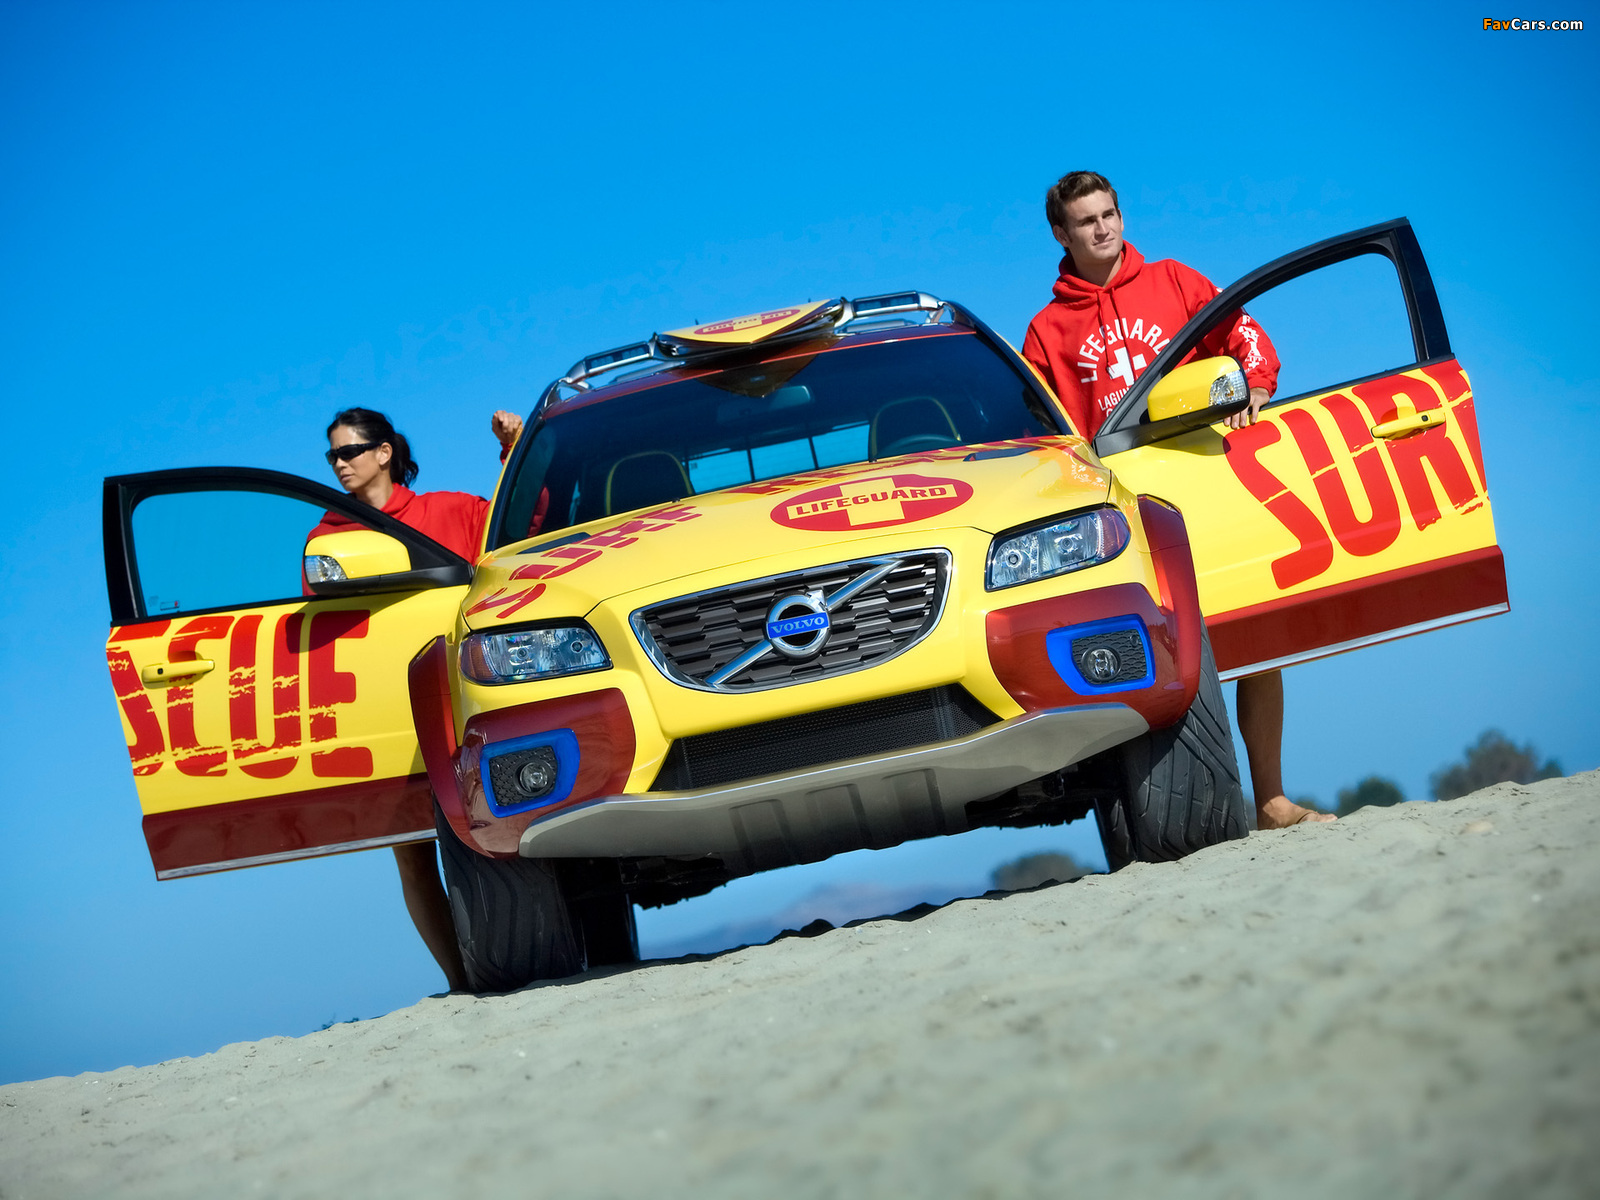 Volvo XC70 Surf Rescue Concept 2007 pictures (1600 x 1200)